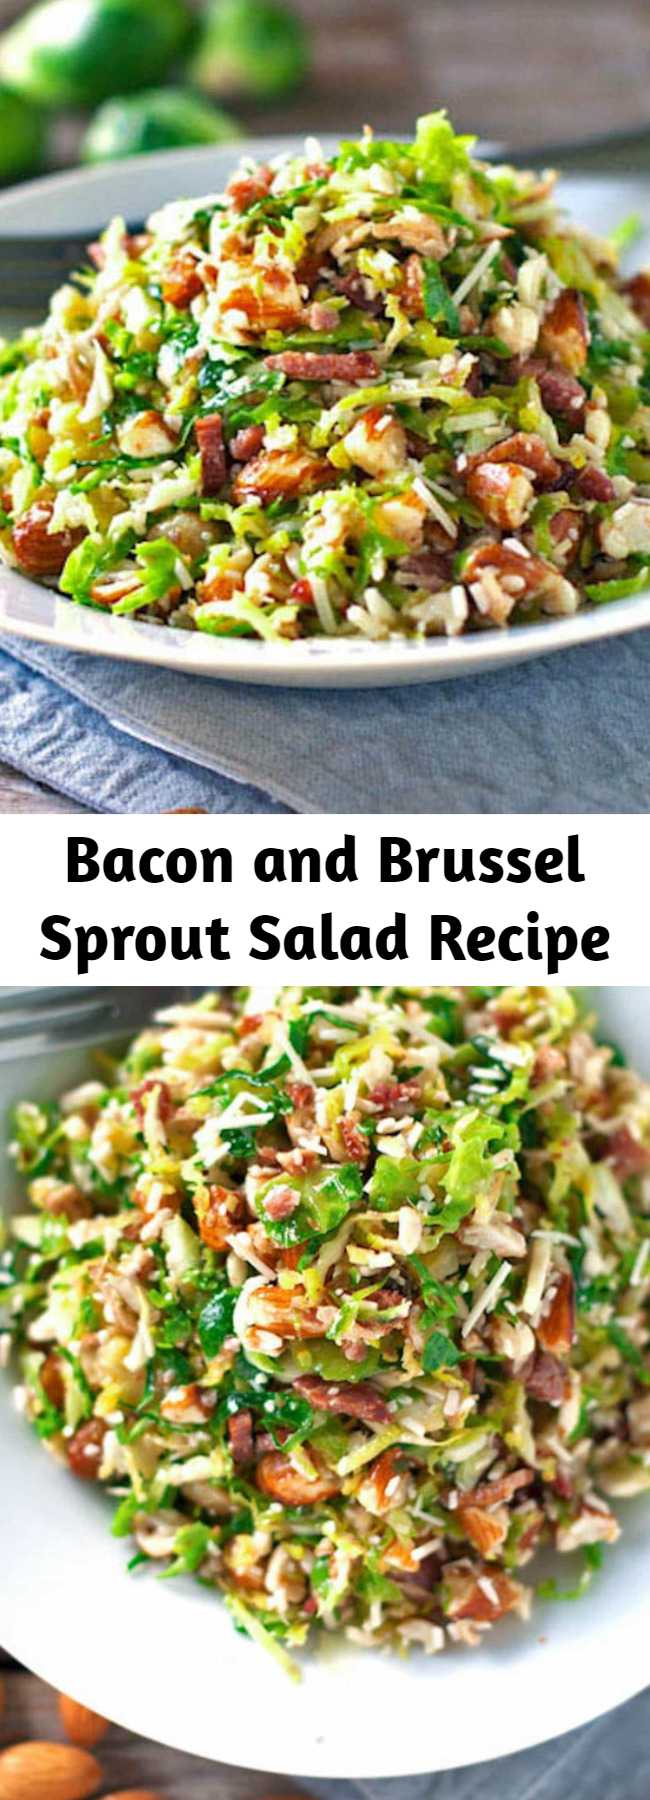 Bacon and Brussel Sprout Salad Recipe - This bacon and brussel sprout salad is so good! Thinly sliced brussel sprouts, crumbled bacon, Parmesan, almonds, and shallot citrus dressing. #salad #brusselsprout #thanksgiving #sides #recipe #easy #bacon